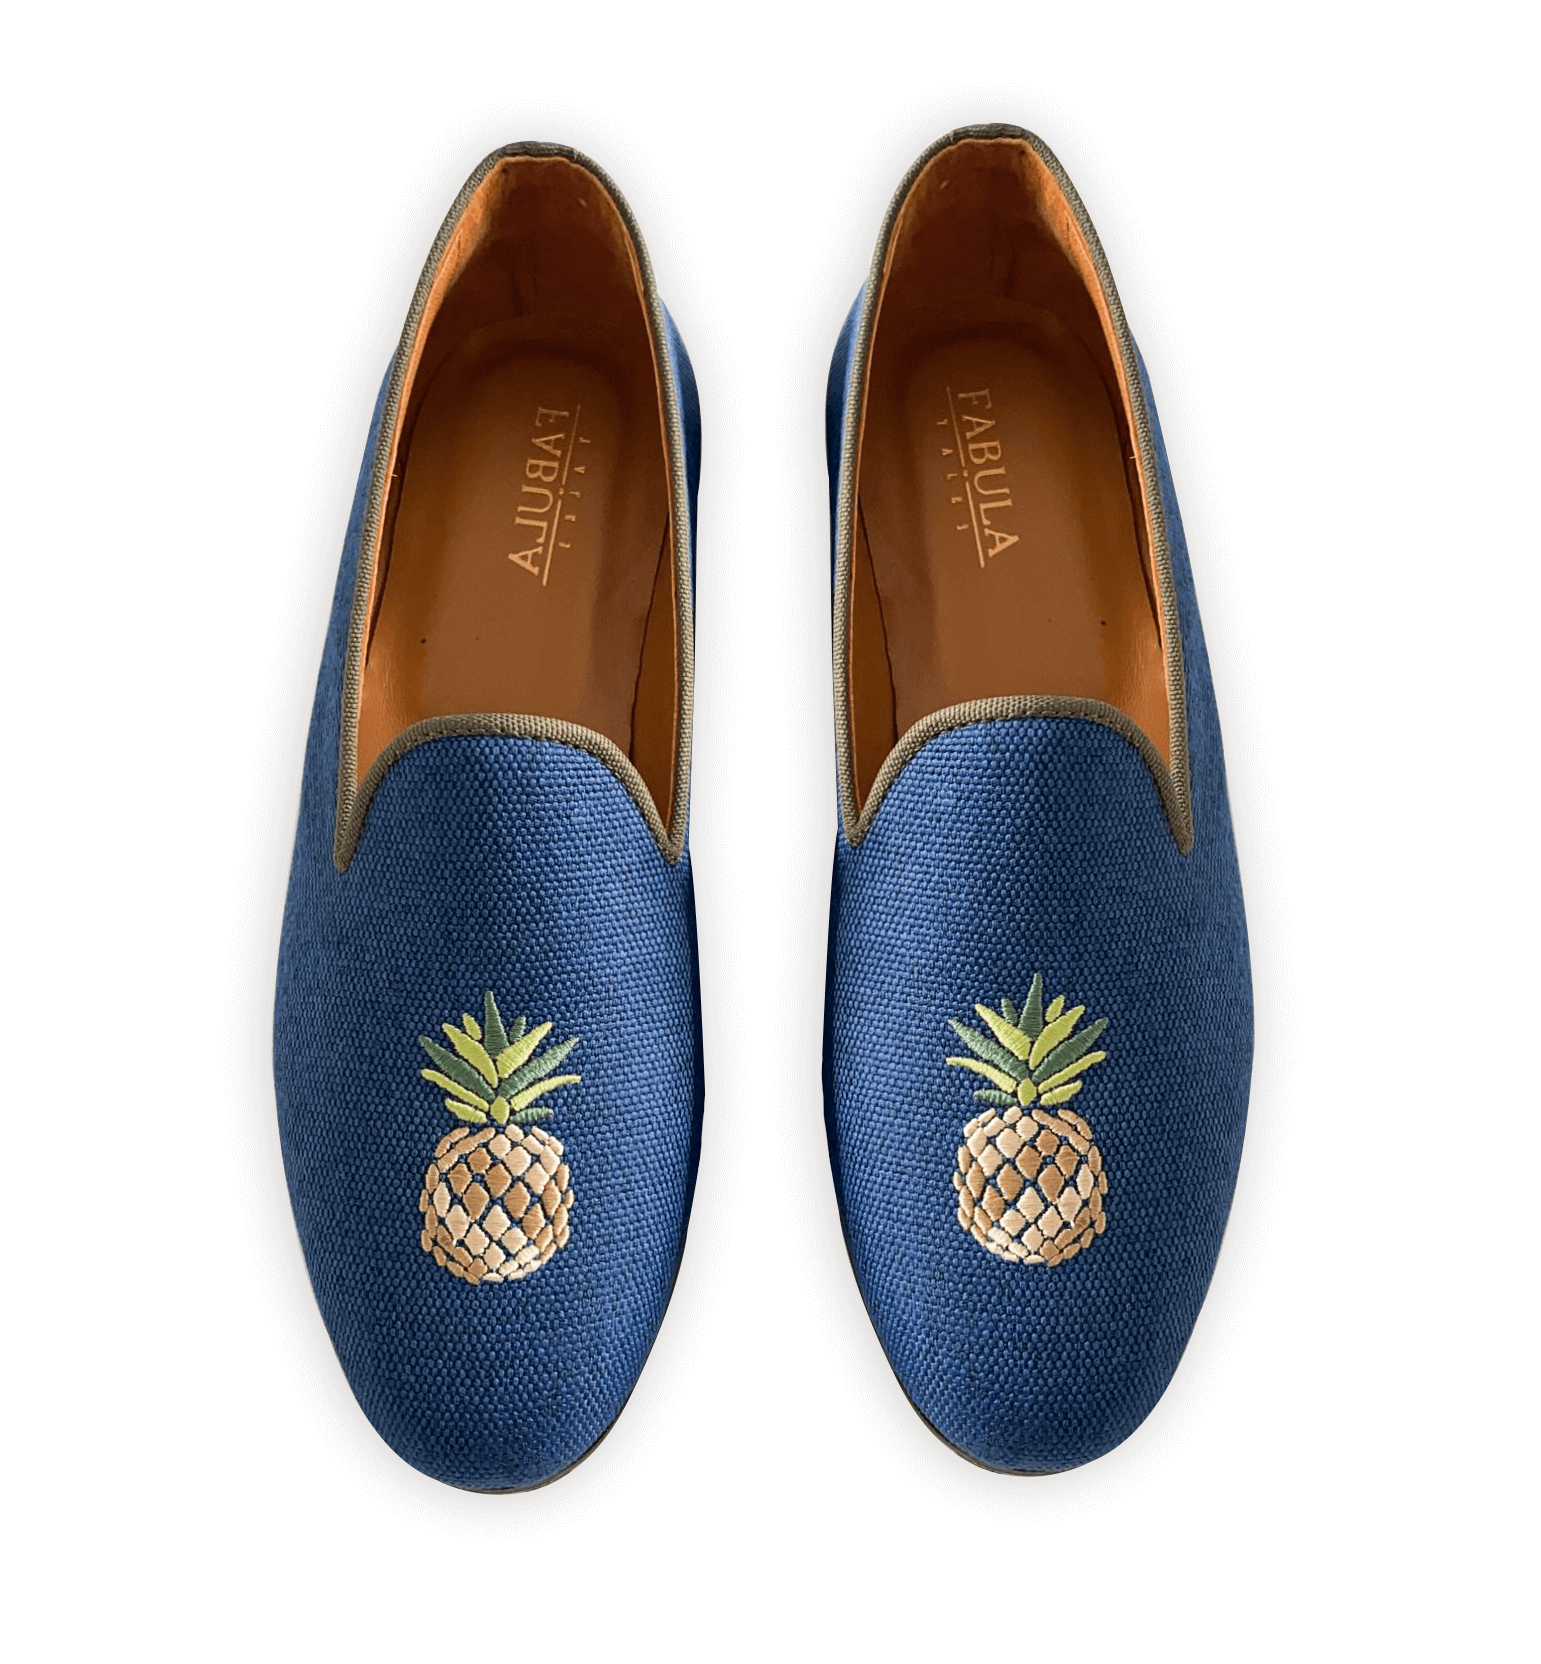 Navy linen slippers with brown grosgrain trimming and pineapple embroidery. Bespoke slippers